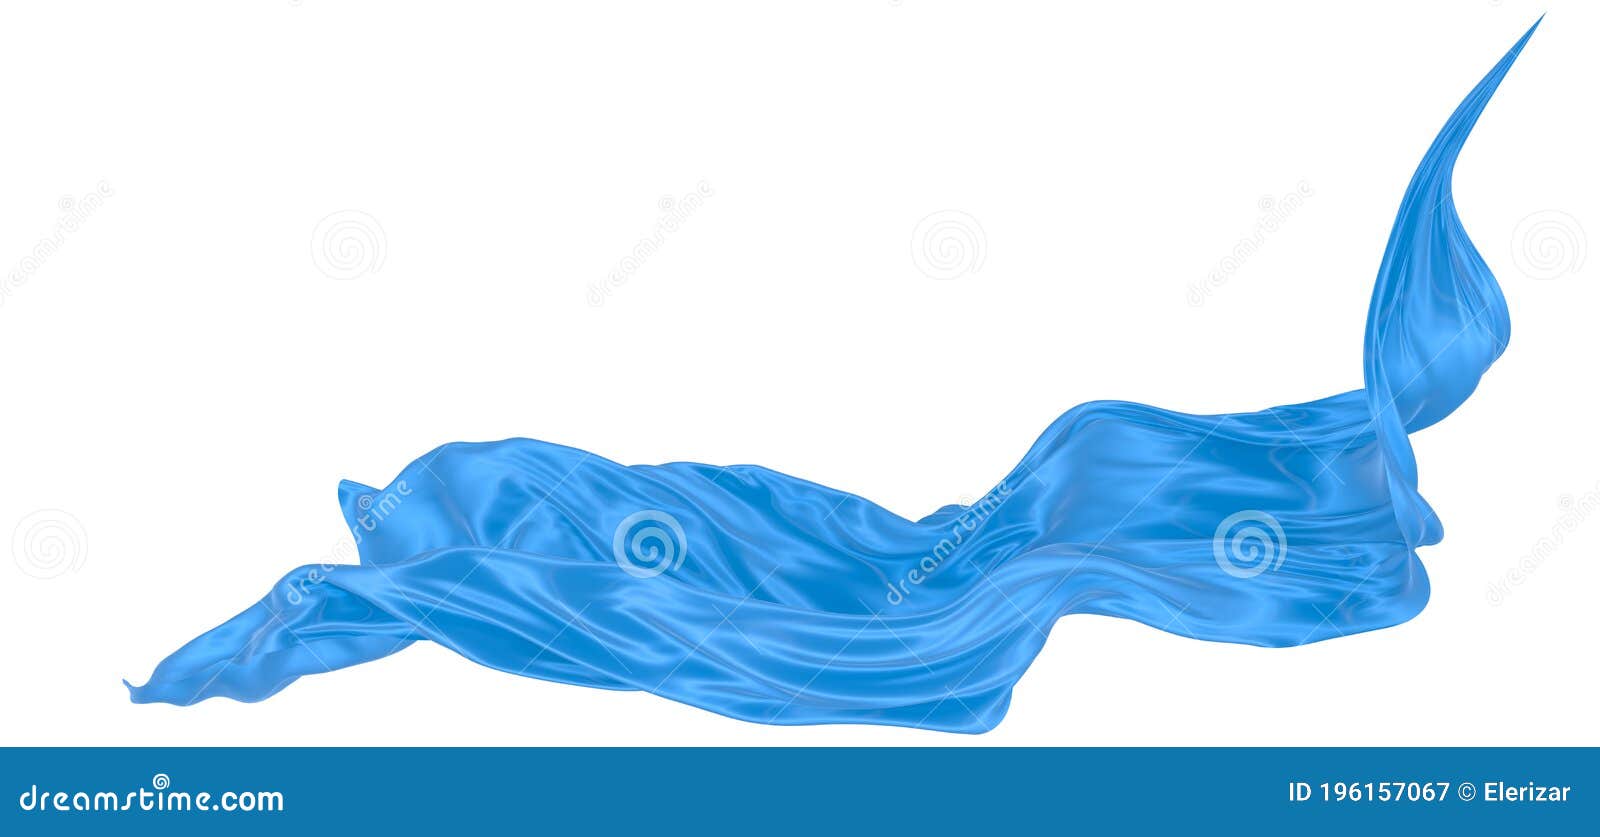 Beautiful Flowing Fabric of Blue Wavy Silk or Satin. 3d Rendering Image ...